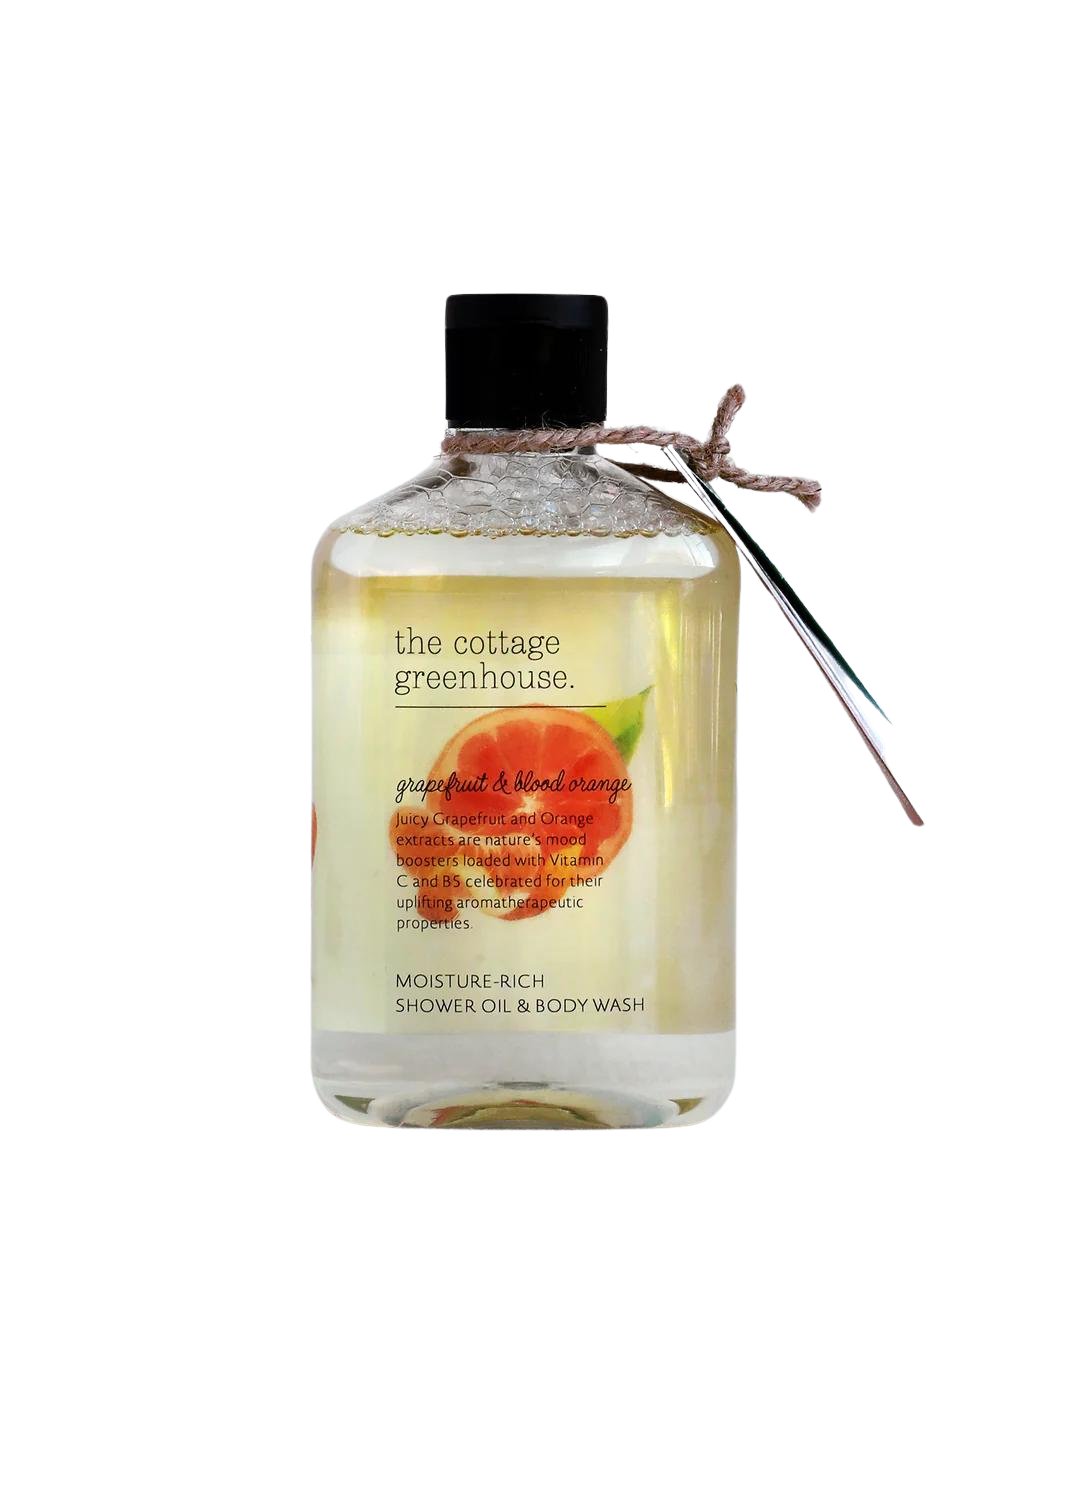 A transparent bottle of Margot Elena's The Cottage Greenhouse Grapefruit & Blood Orange Body Wash, labeled grapefruit and blood orange, with moisture-rich content, tied with a twine at the neck, on a white